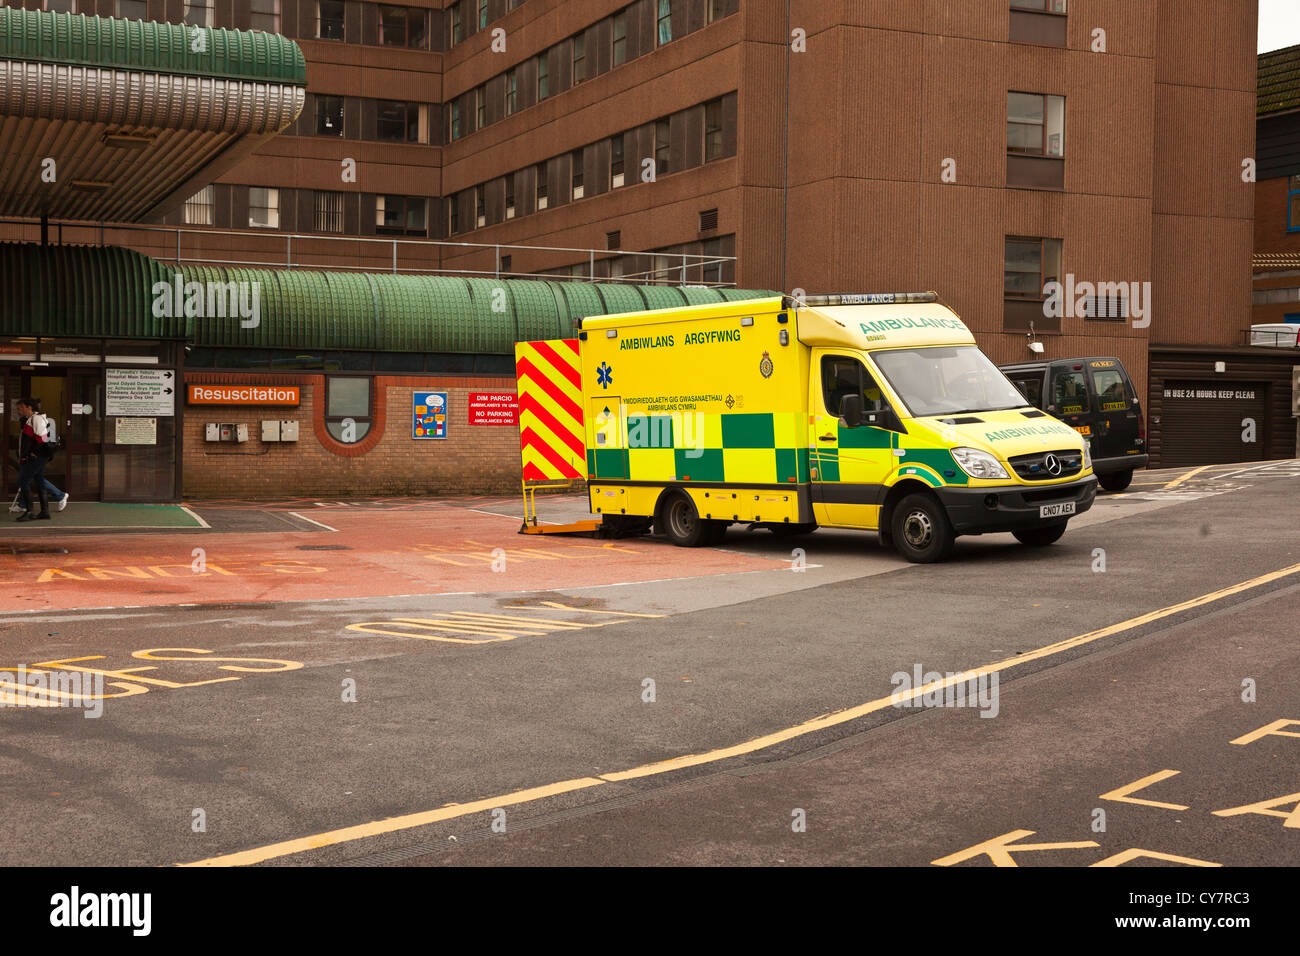 Ambulance unloading patient at A&E emergency casualty department of the Royal Gwent Hospital Newport Wales UK. Stock Photo